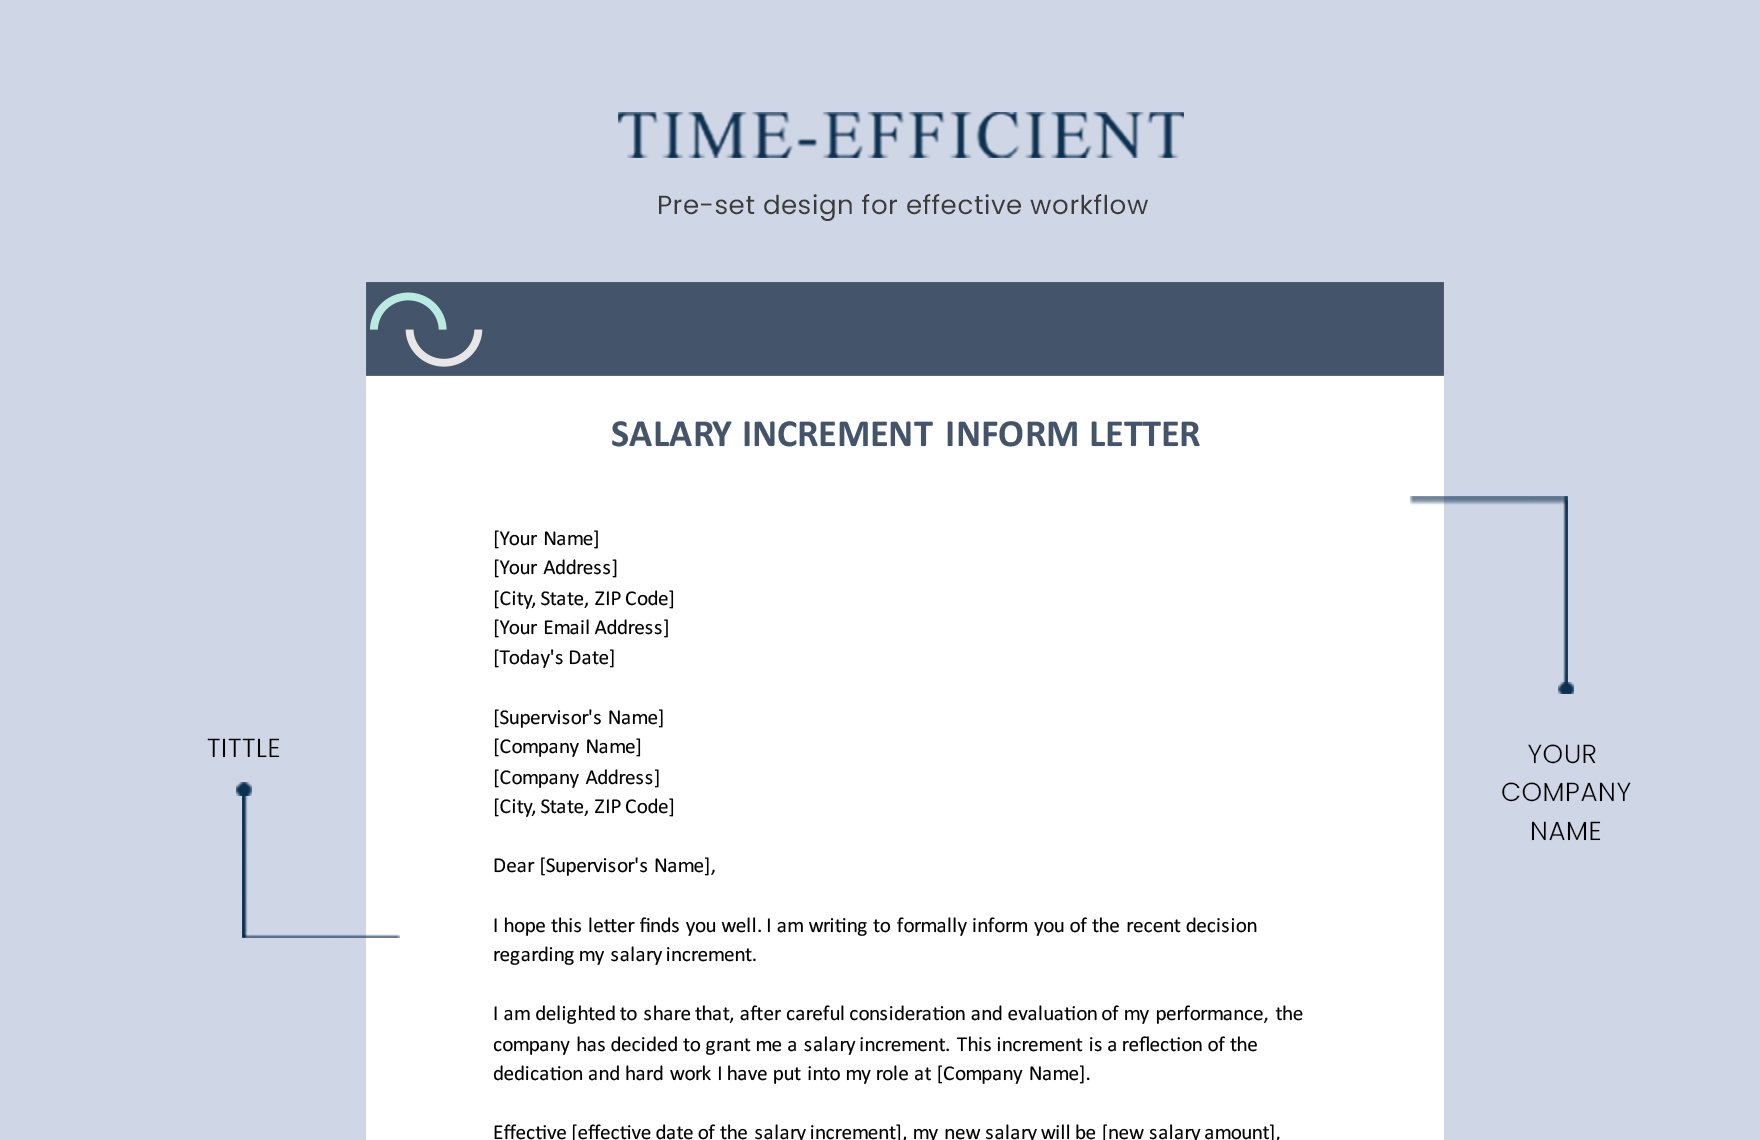 Salary Increment Inform Letter